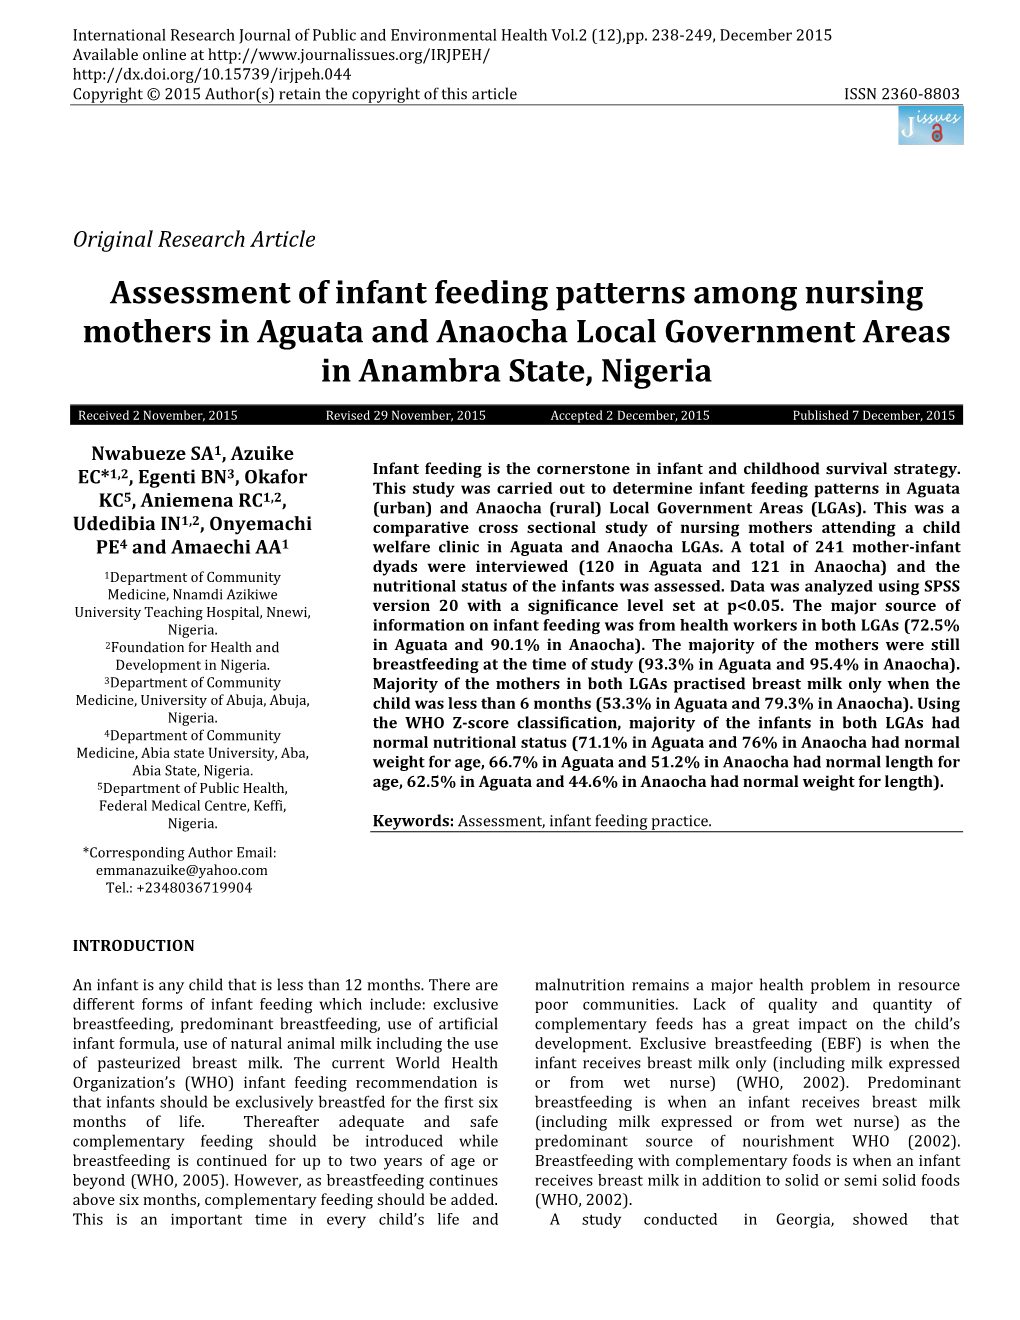 Assessment of Infant Feeding Patterns Among Nursing Mothers in Aguata and Anaocha Local Government Areas in Anambra State, Nigeria